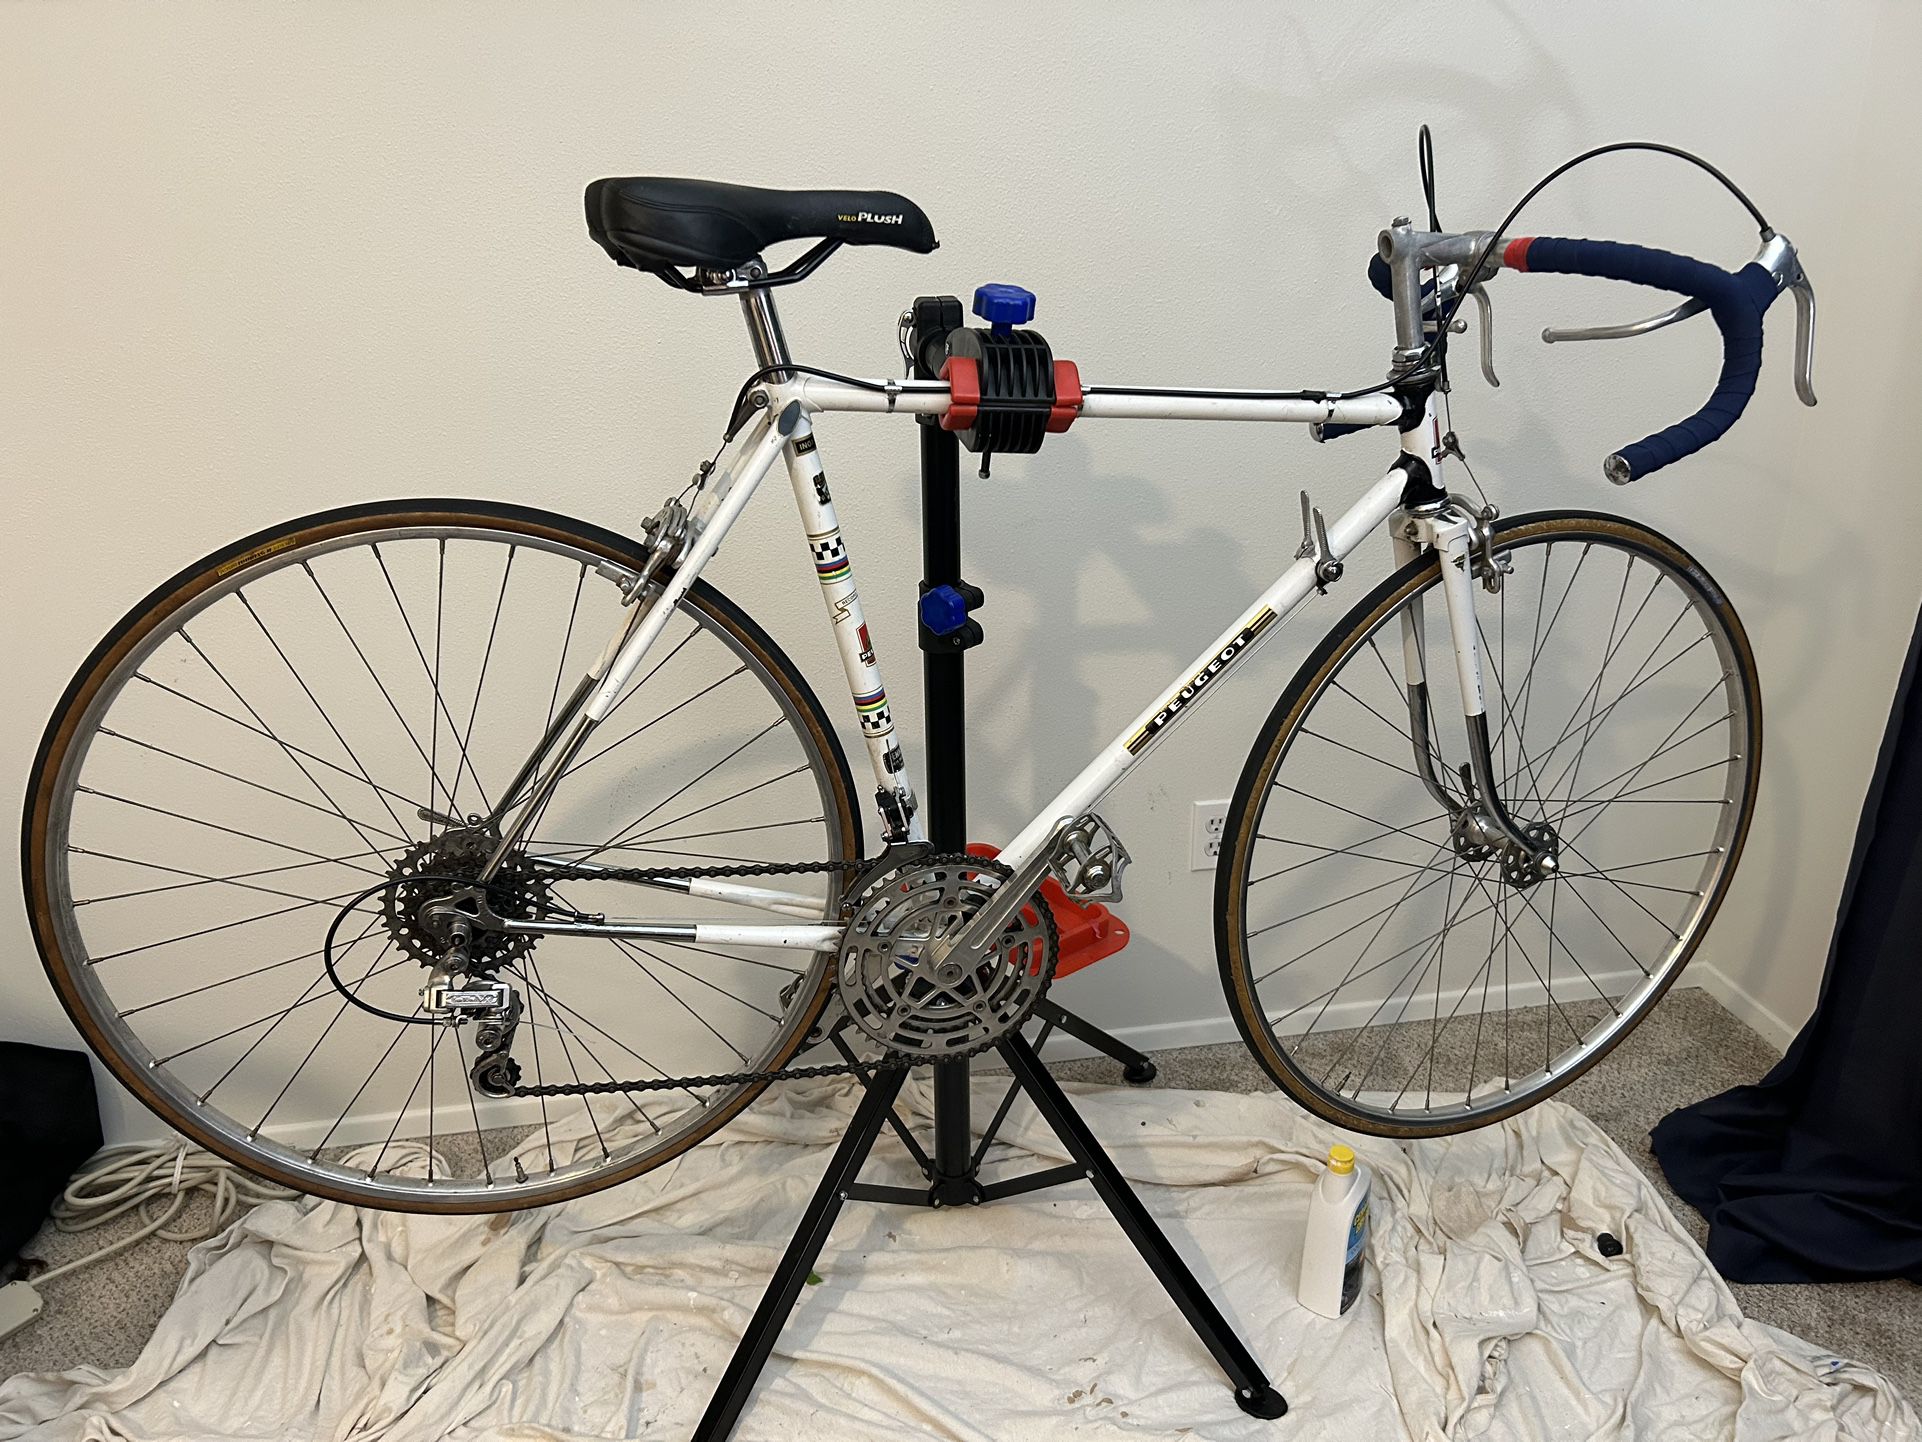 Peugeot PX-10 With Reynolds 531 (Sale Pending)